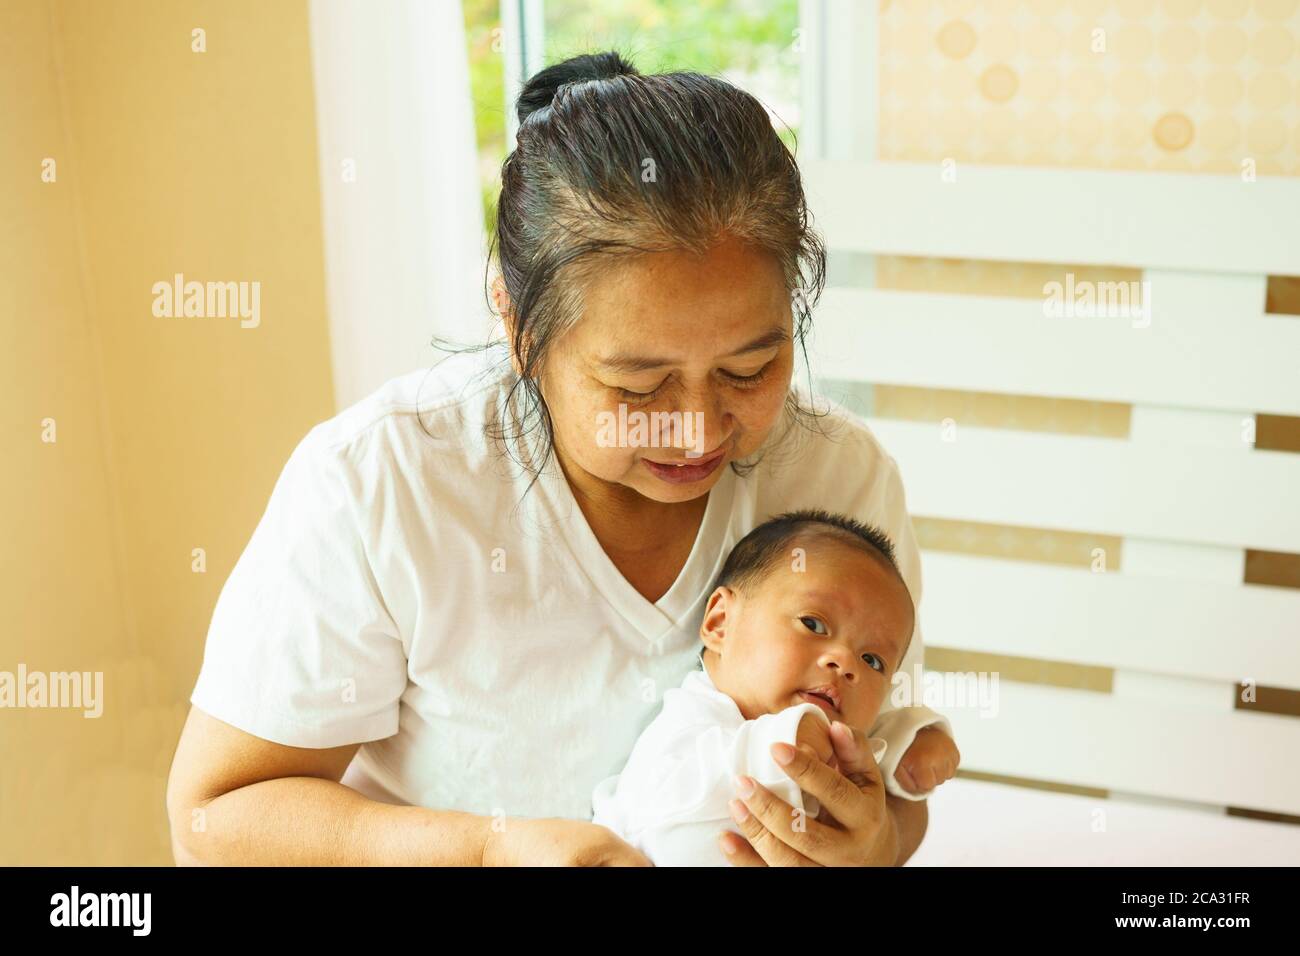 Asian grandmother is playing with her grandchild. Stock Photo